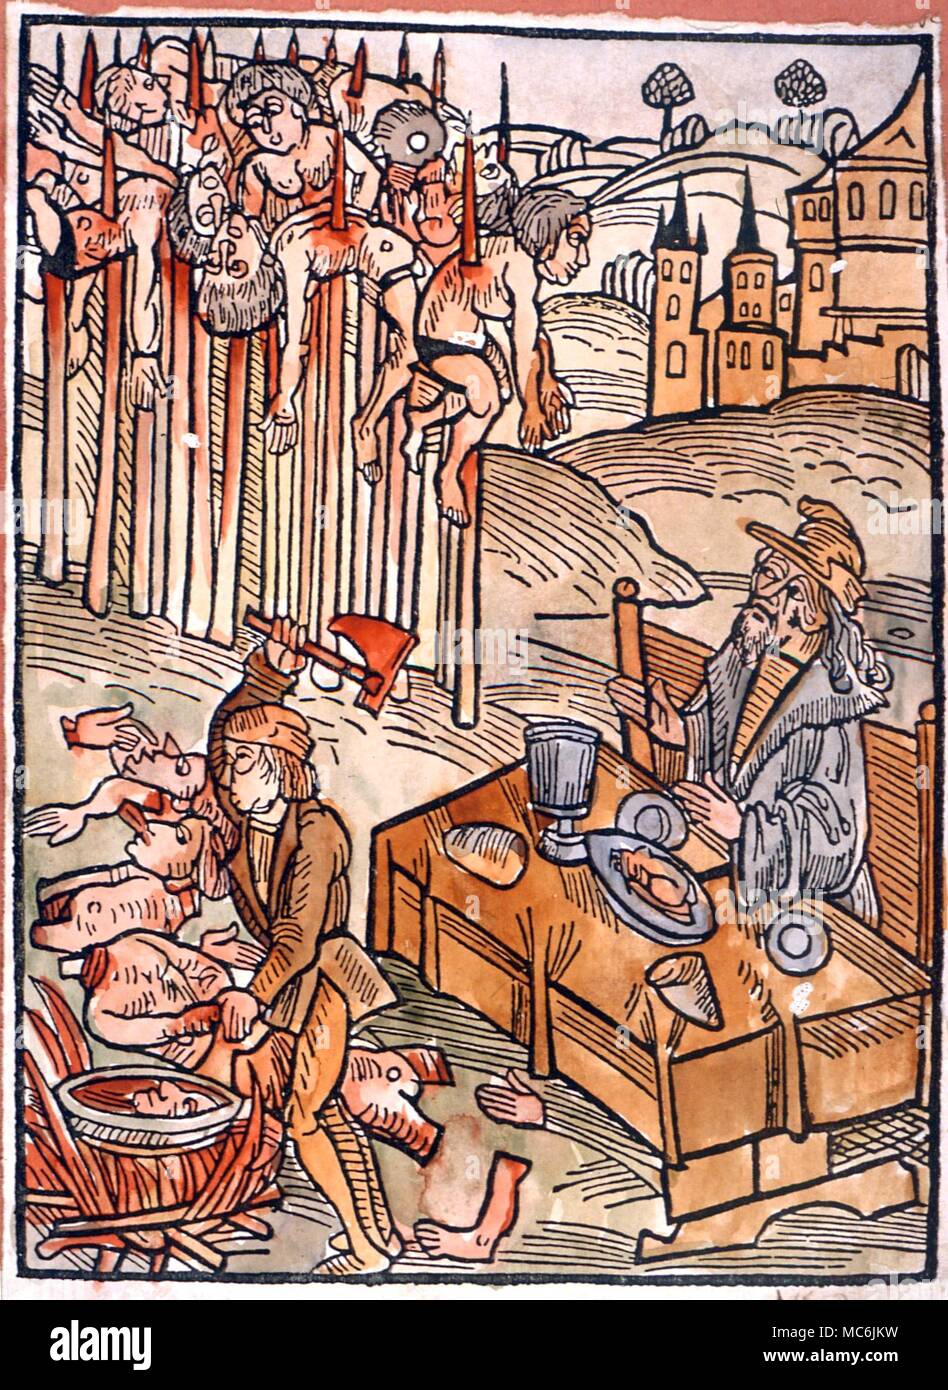 DRACULA - Woodcut of circa 1490 puiblished in Germany, portraying 'the wild bloodthirsty berserker, Dracula Voevod' dining among his impaled victims. He is supposed to have forced mothers to eat their children. Stock Photo